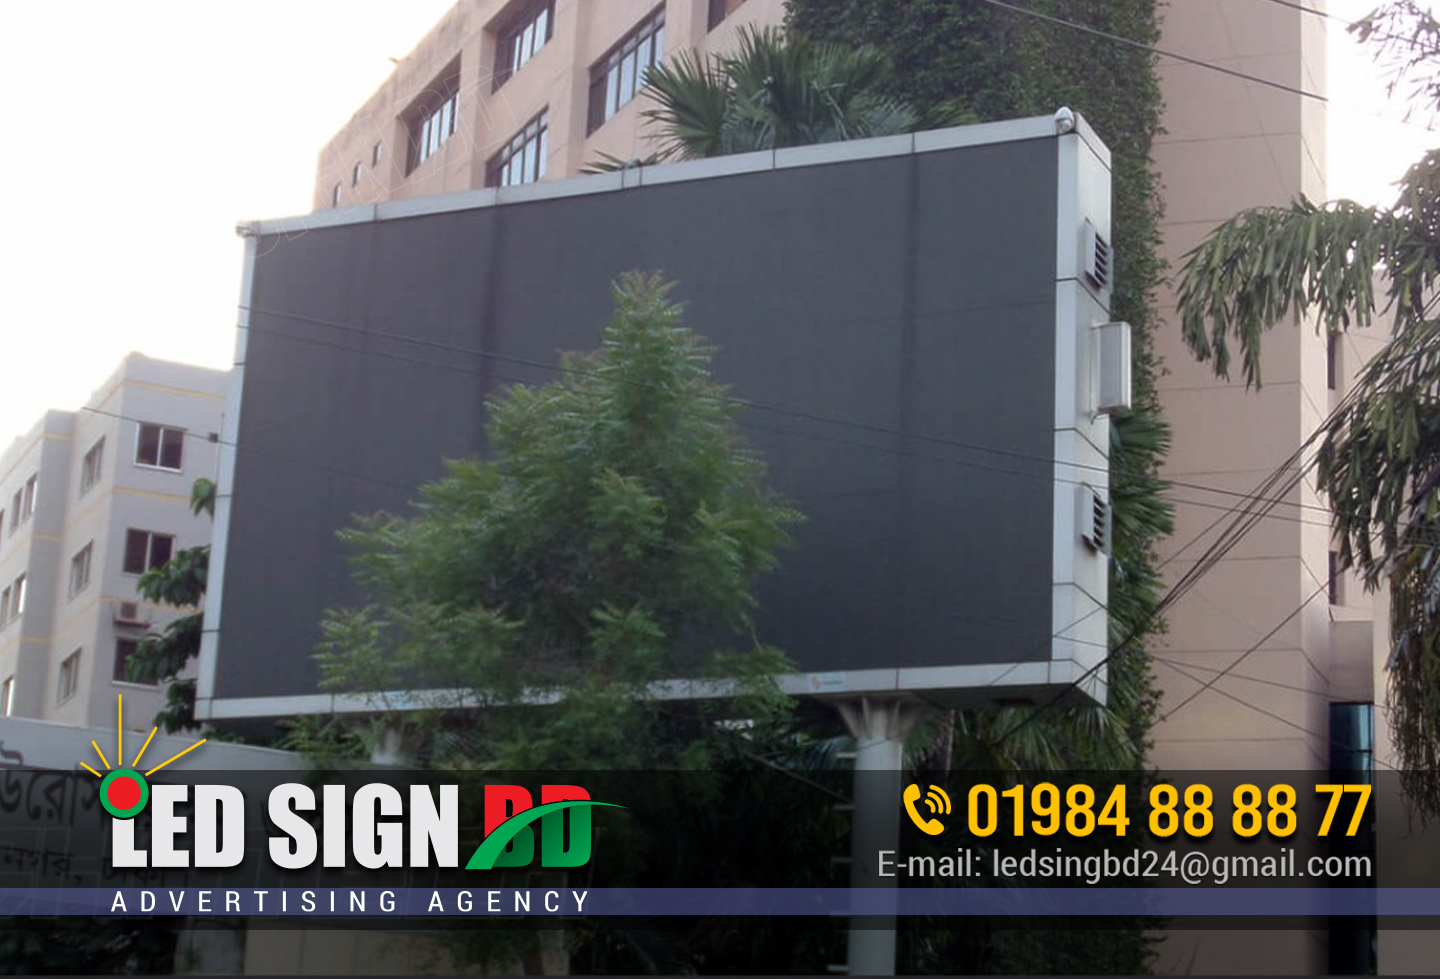 P6 Outdoor LED Display Video Wall price in Dhaka Bangladesh, 56 Inches Digital Standee, Input Voltage: 240 V, Resolution: 1920 X 1080 Pixels, Advertising LED Display Screen P8 Outdoor in Dhaka Bangladesh, P4 P5 P6 outdoor street lighting pole vertical digital signage signs LED advertising screen bd, Outdoor Scrolling LED Display Board, Stand Led Display Signage